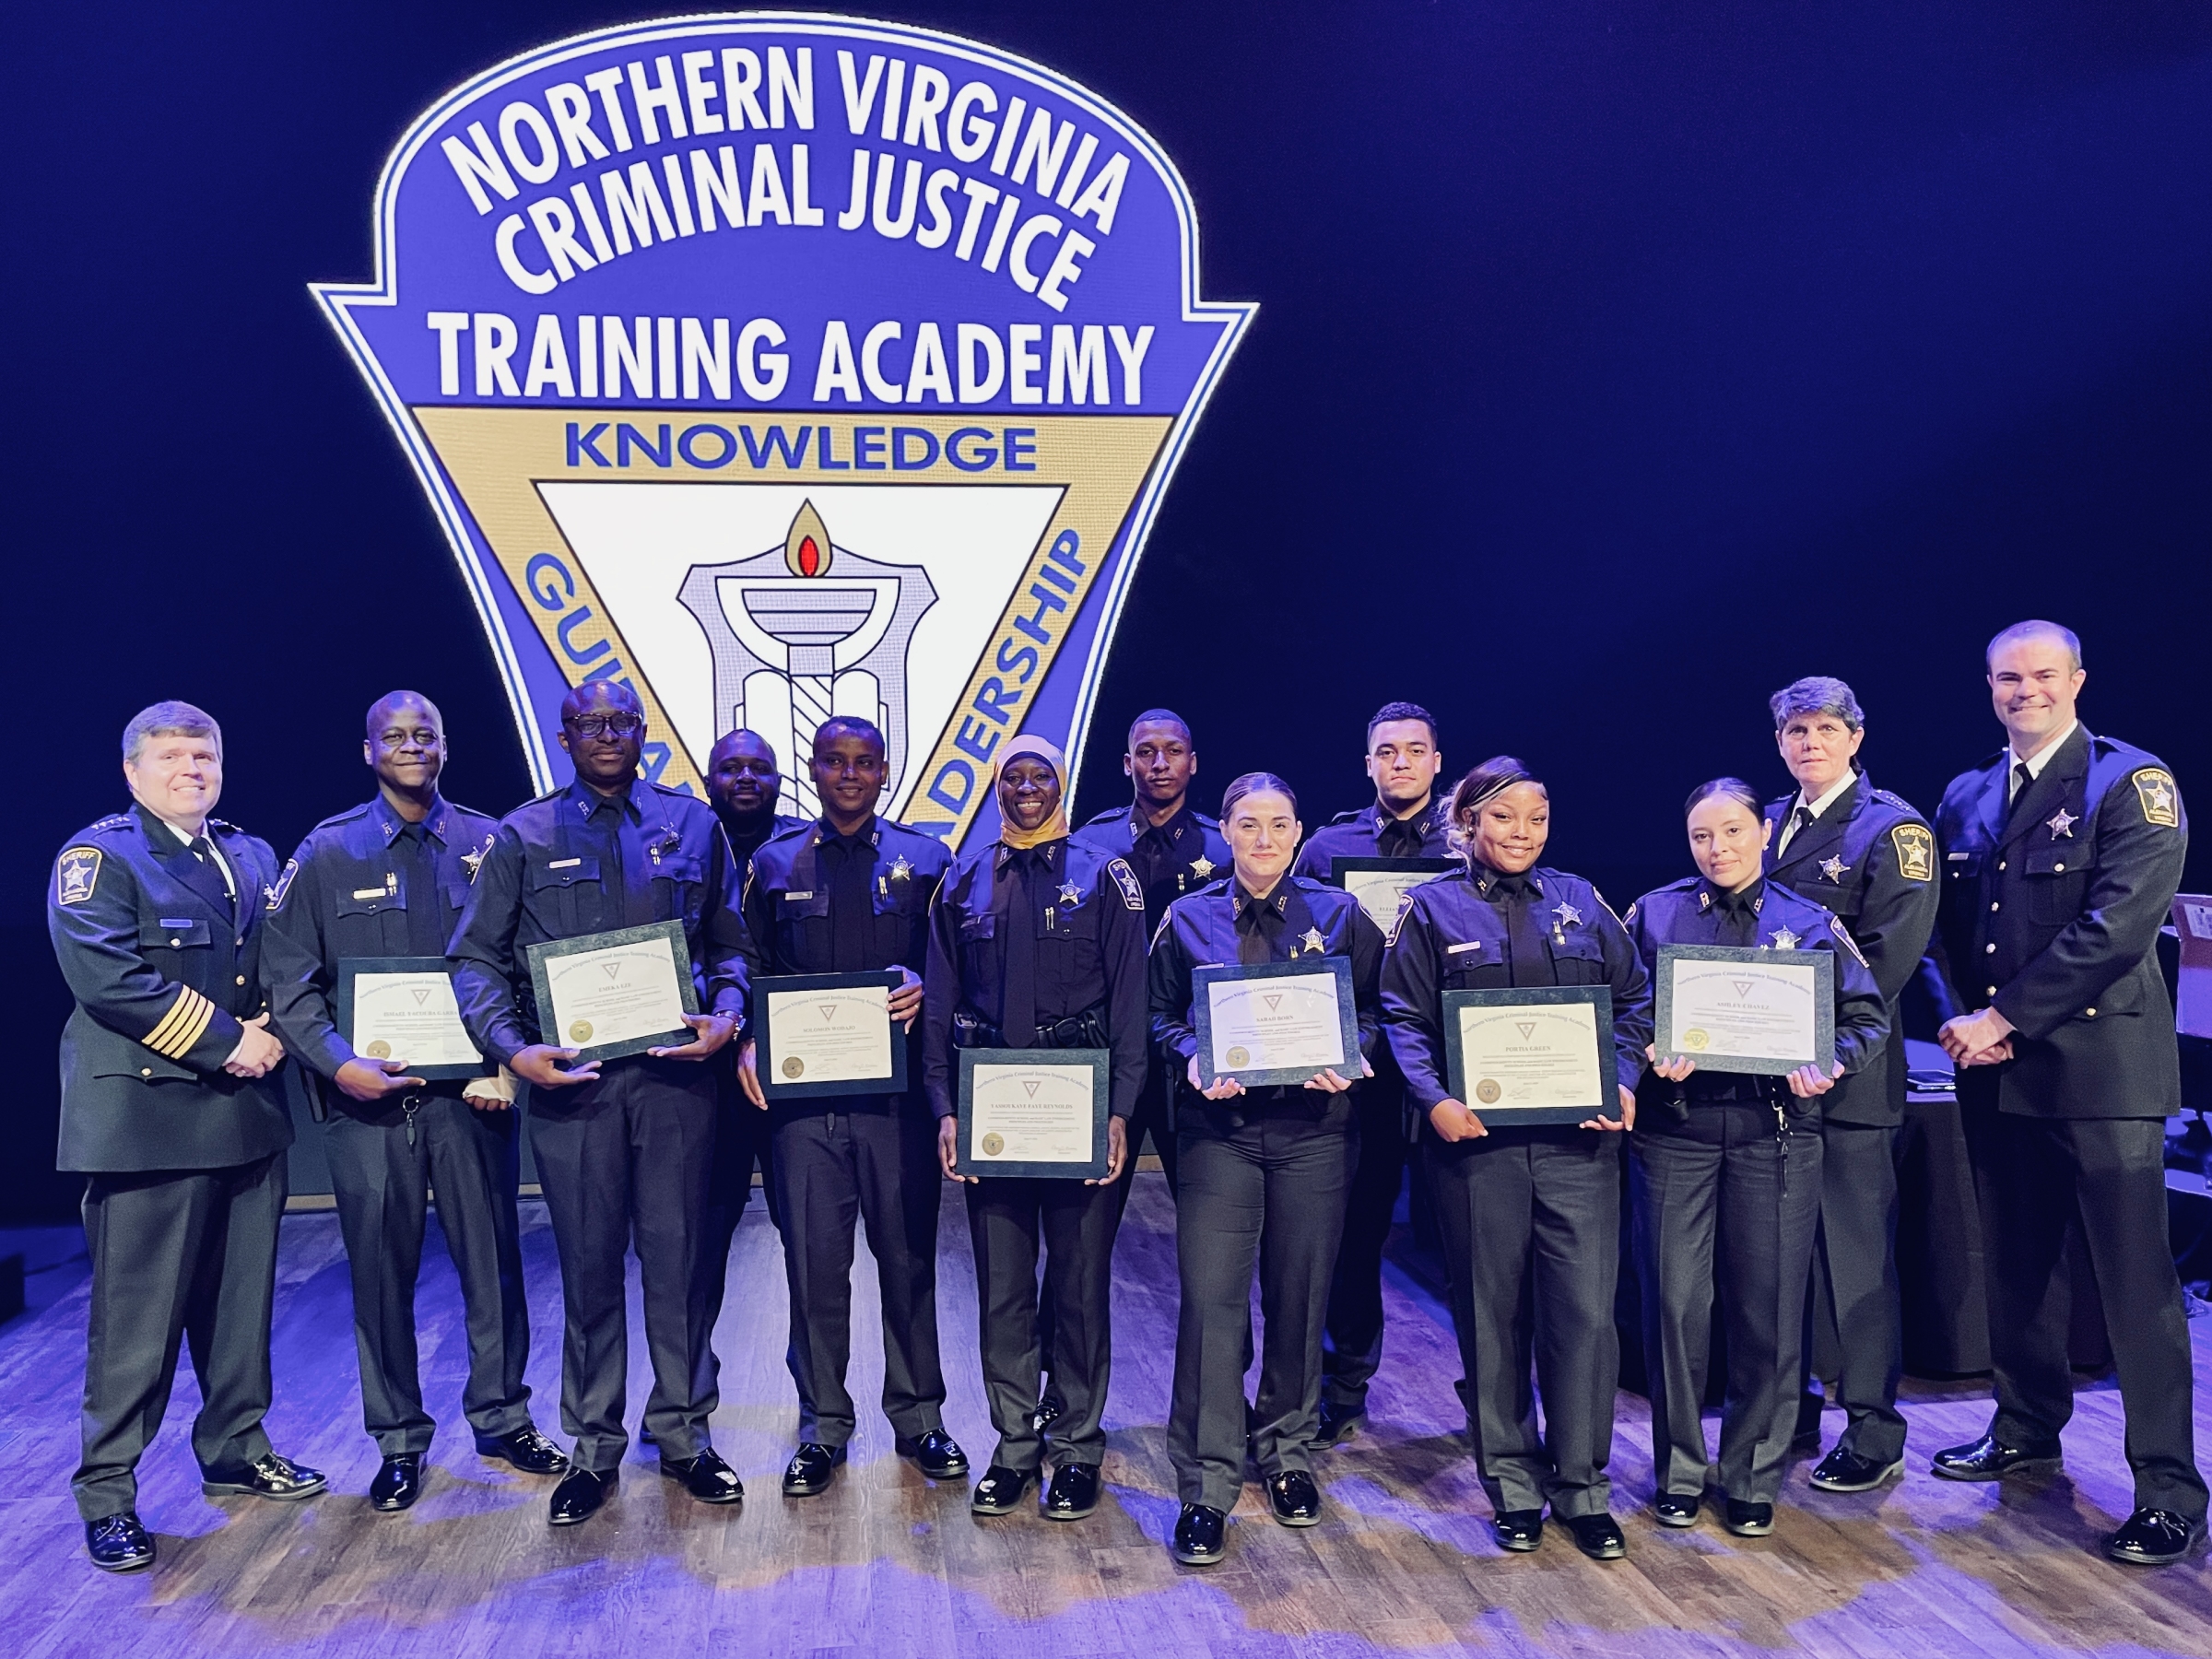 Thirteen uniformed personnel, including Sheriff and ten recruits holding certificates, in from a large logo reading Northern Virginia Criminal Justice Training Academy